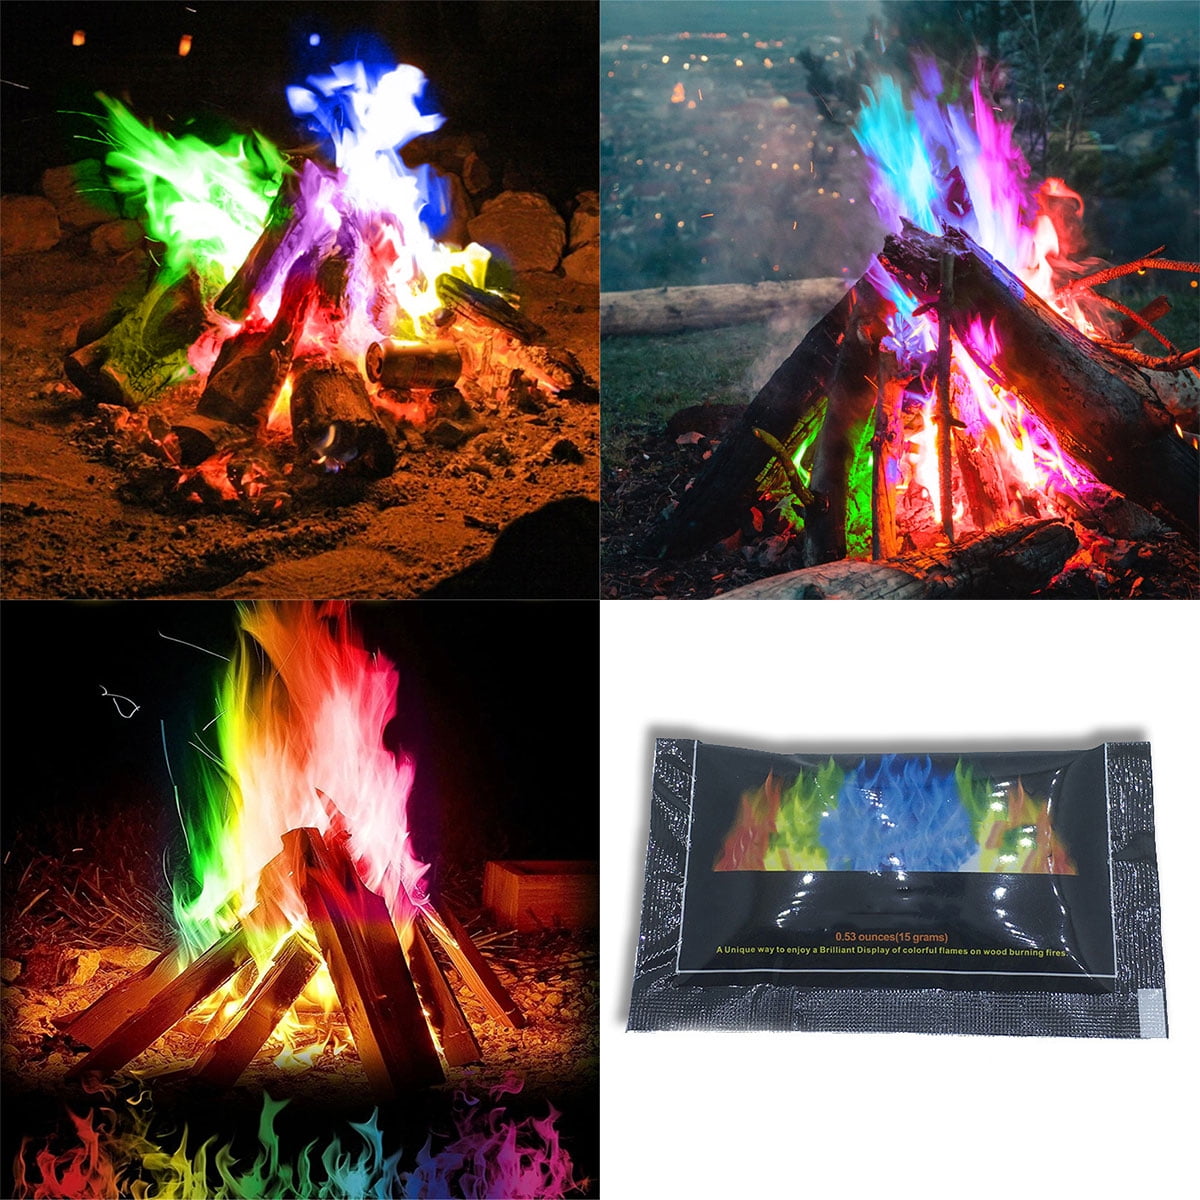 Renewed Magical Flames 25-pack: TWICE THE COLOR Creates Vibrant half the price Rainbow Colored Flames